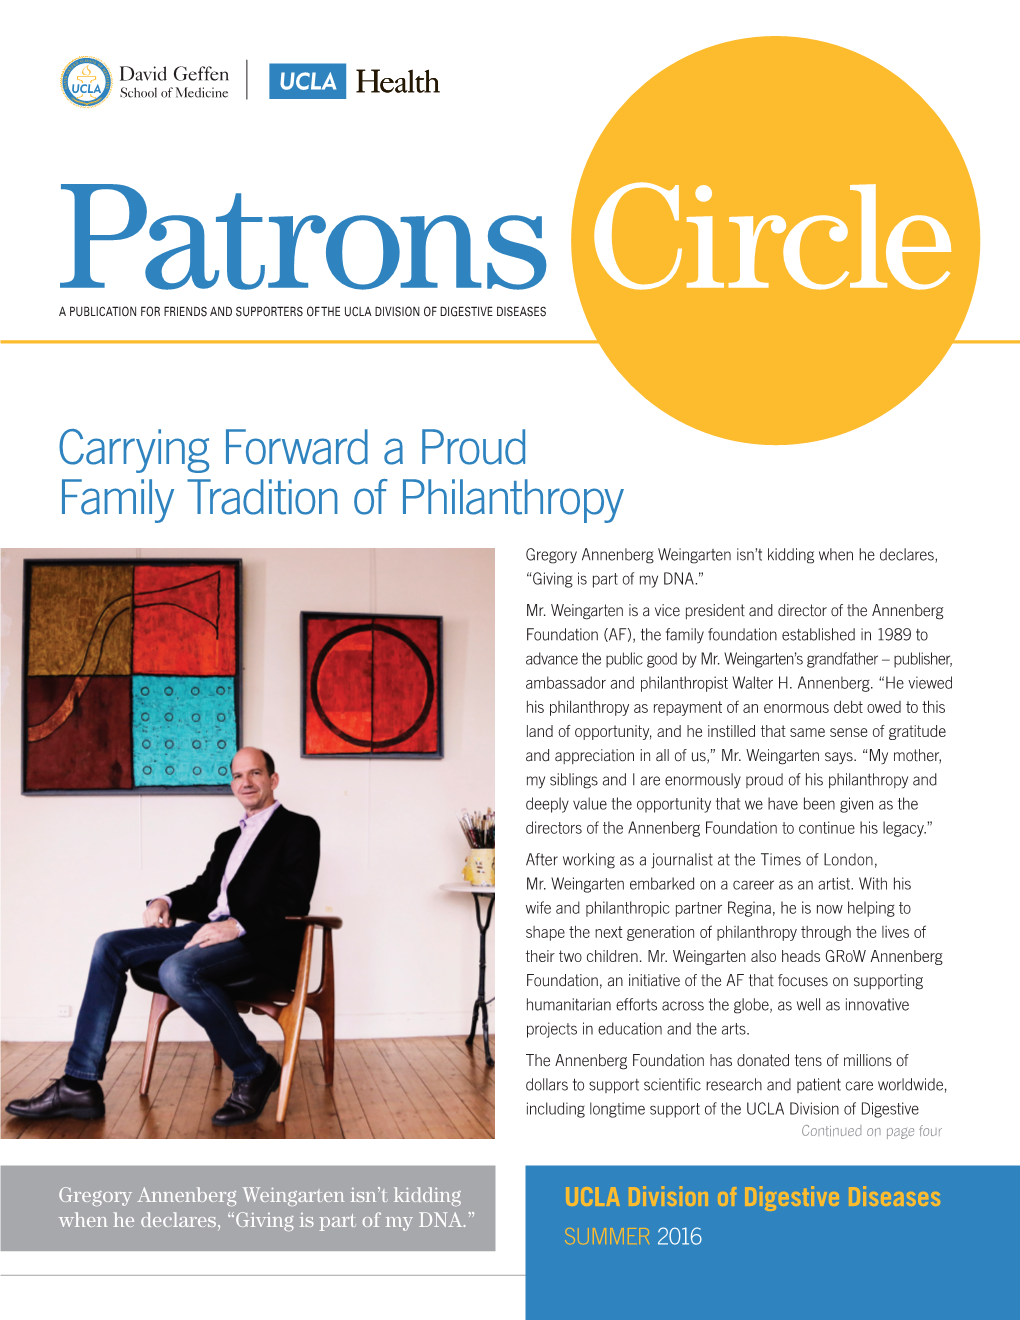 Carrying Forward a Proud Family Tradition of Philanthropy